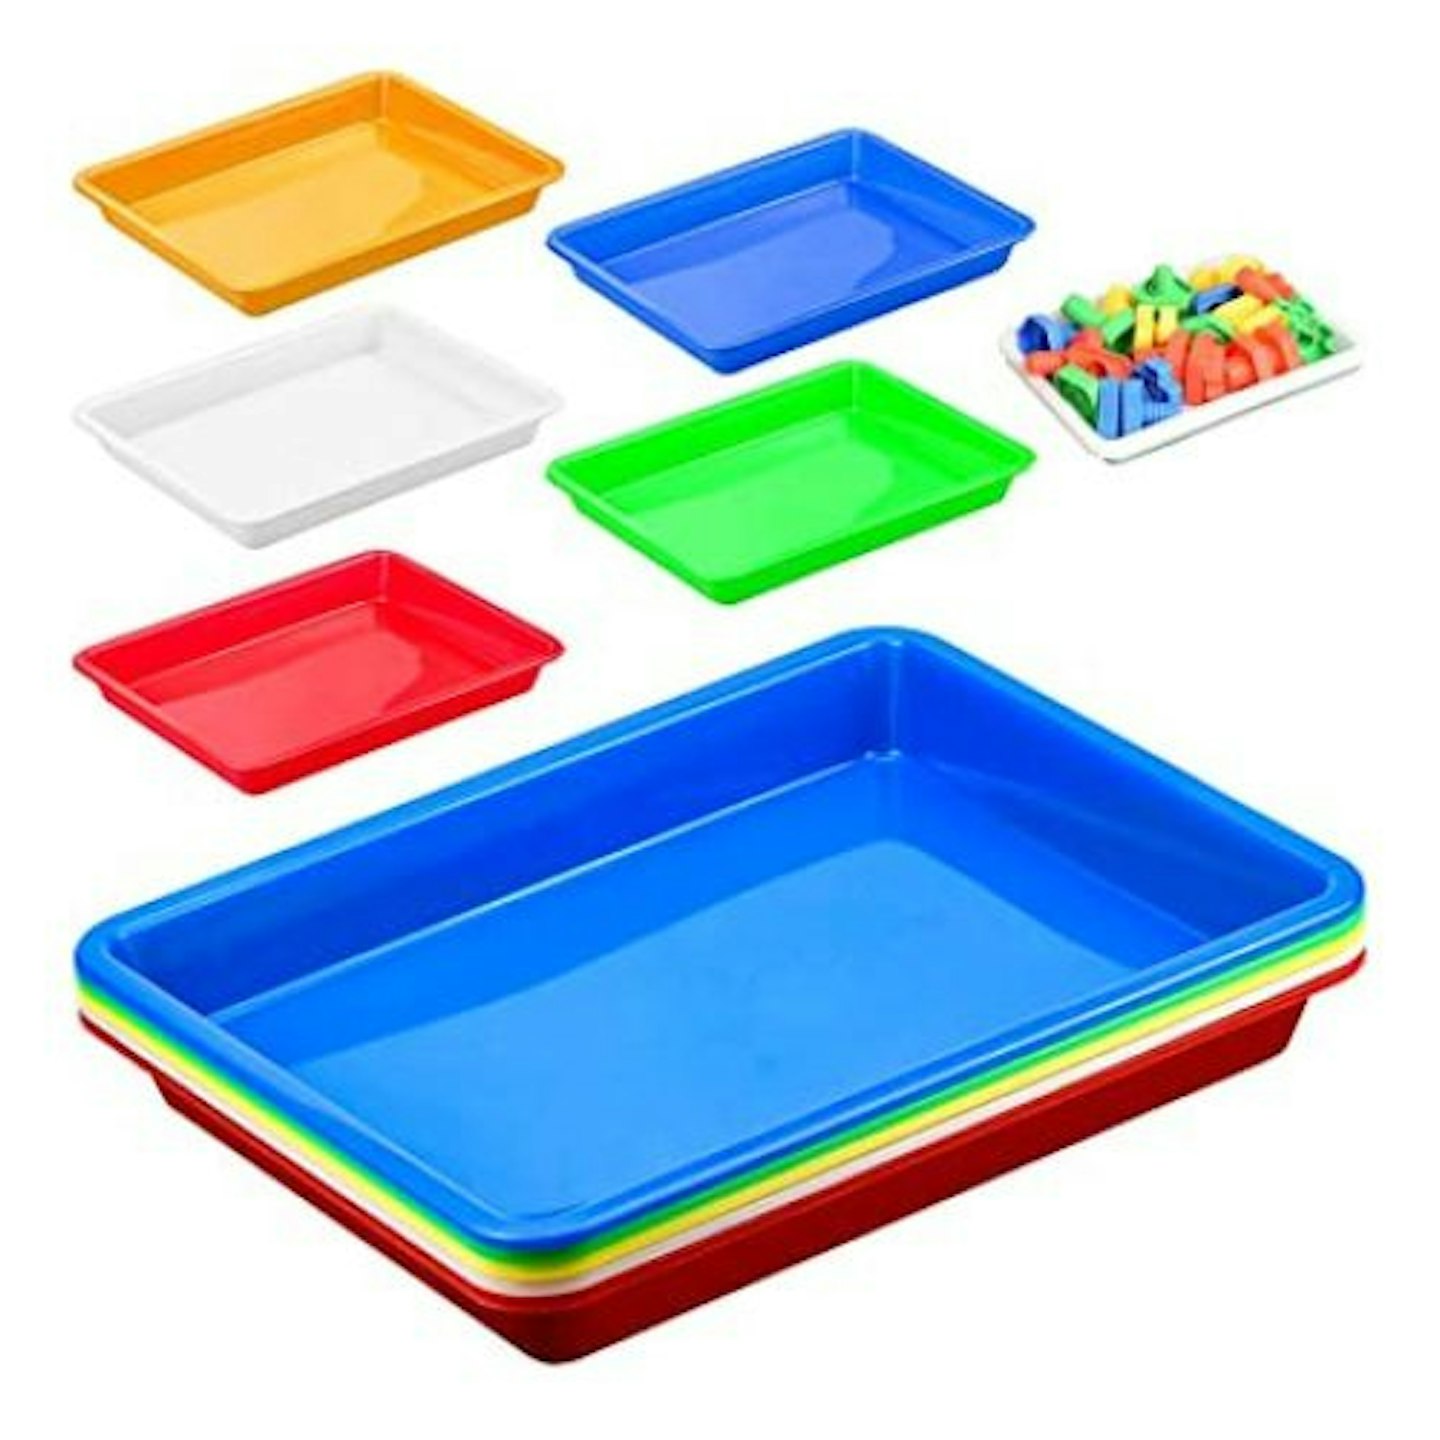 Kid Activity Plastic Tray Multipurpose Art and Crafts Organizer Tray  Plastic Serving Trays for Sensory Toys, Beads, Painting, DIY Projects, Fun  Home